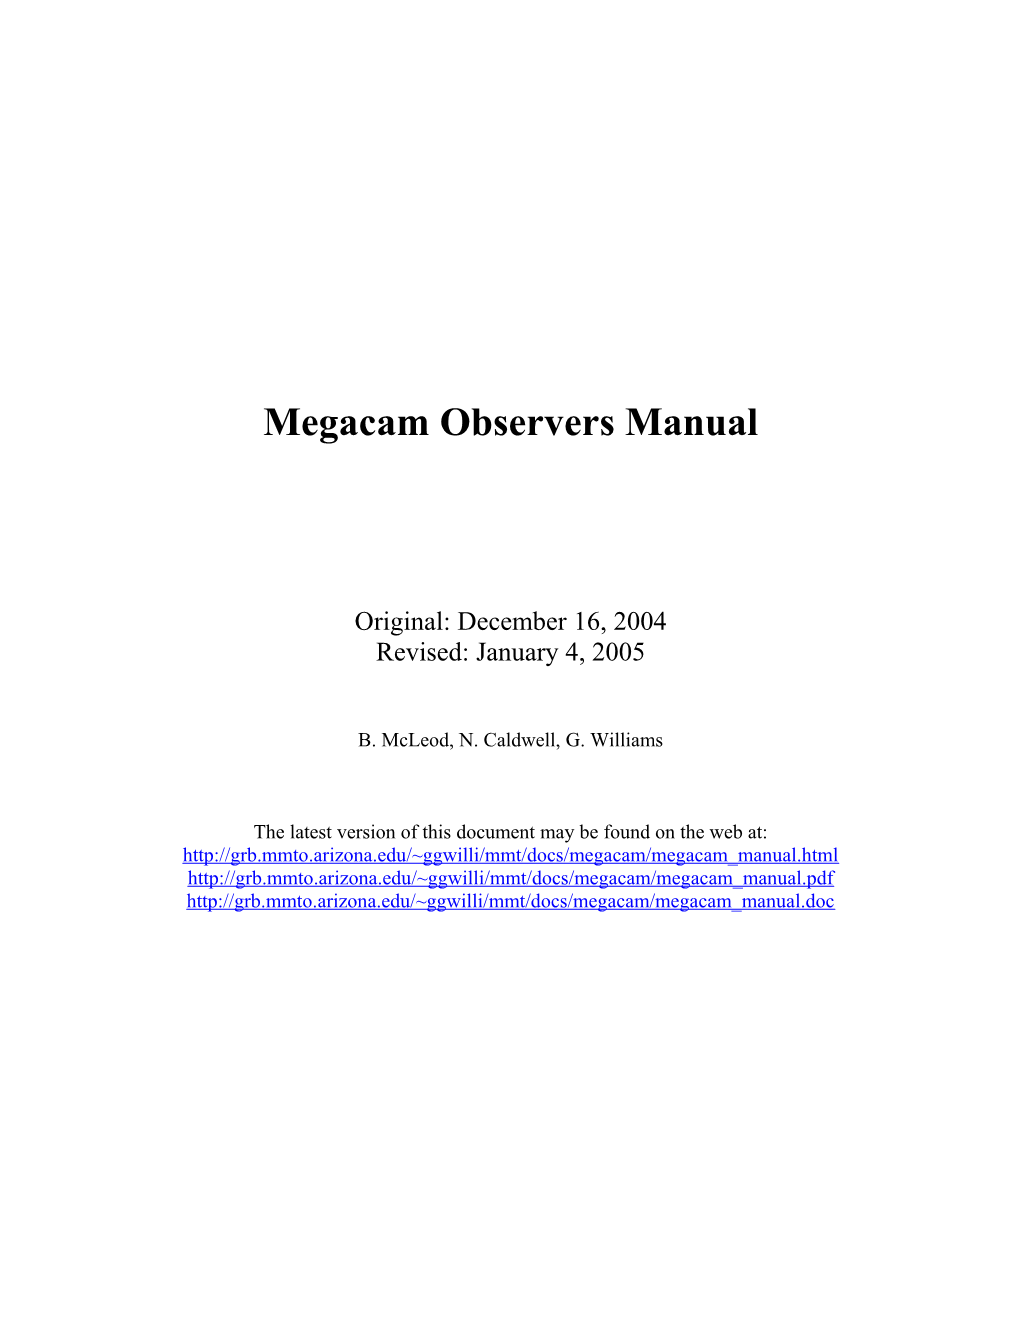 Observers Manual for Megacam on the MMT